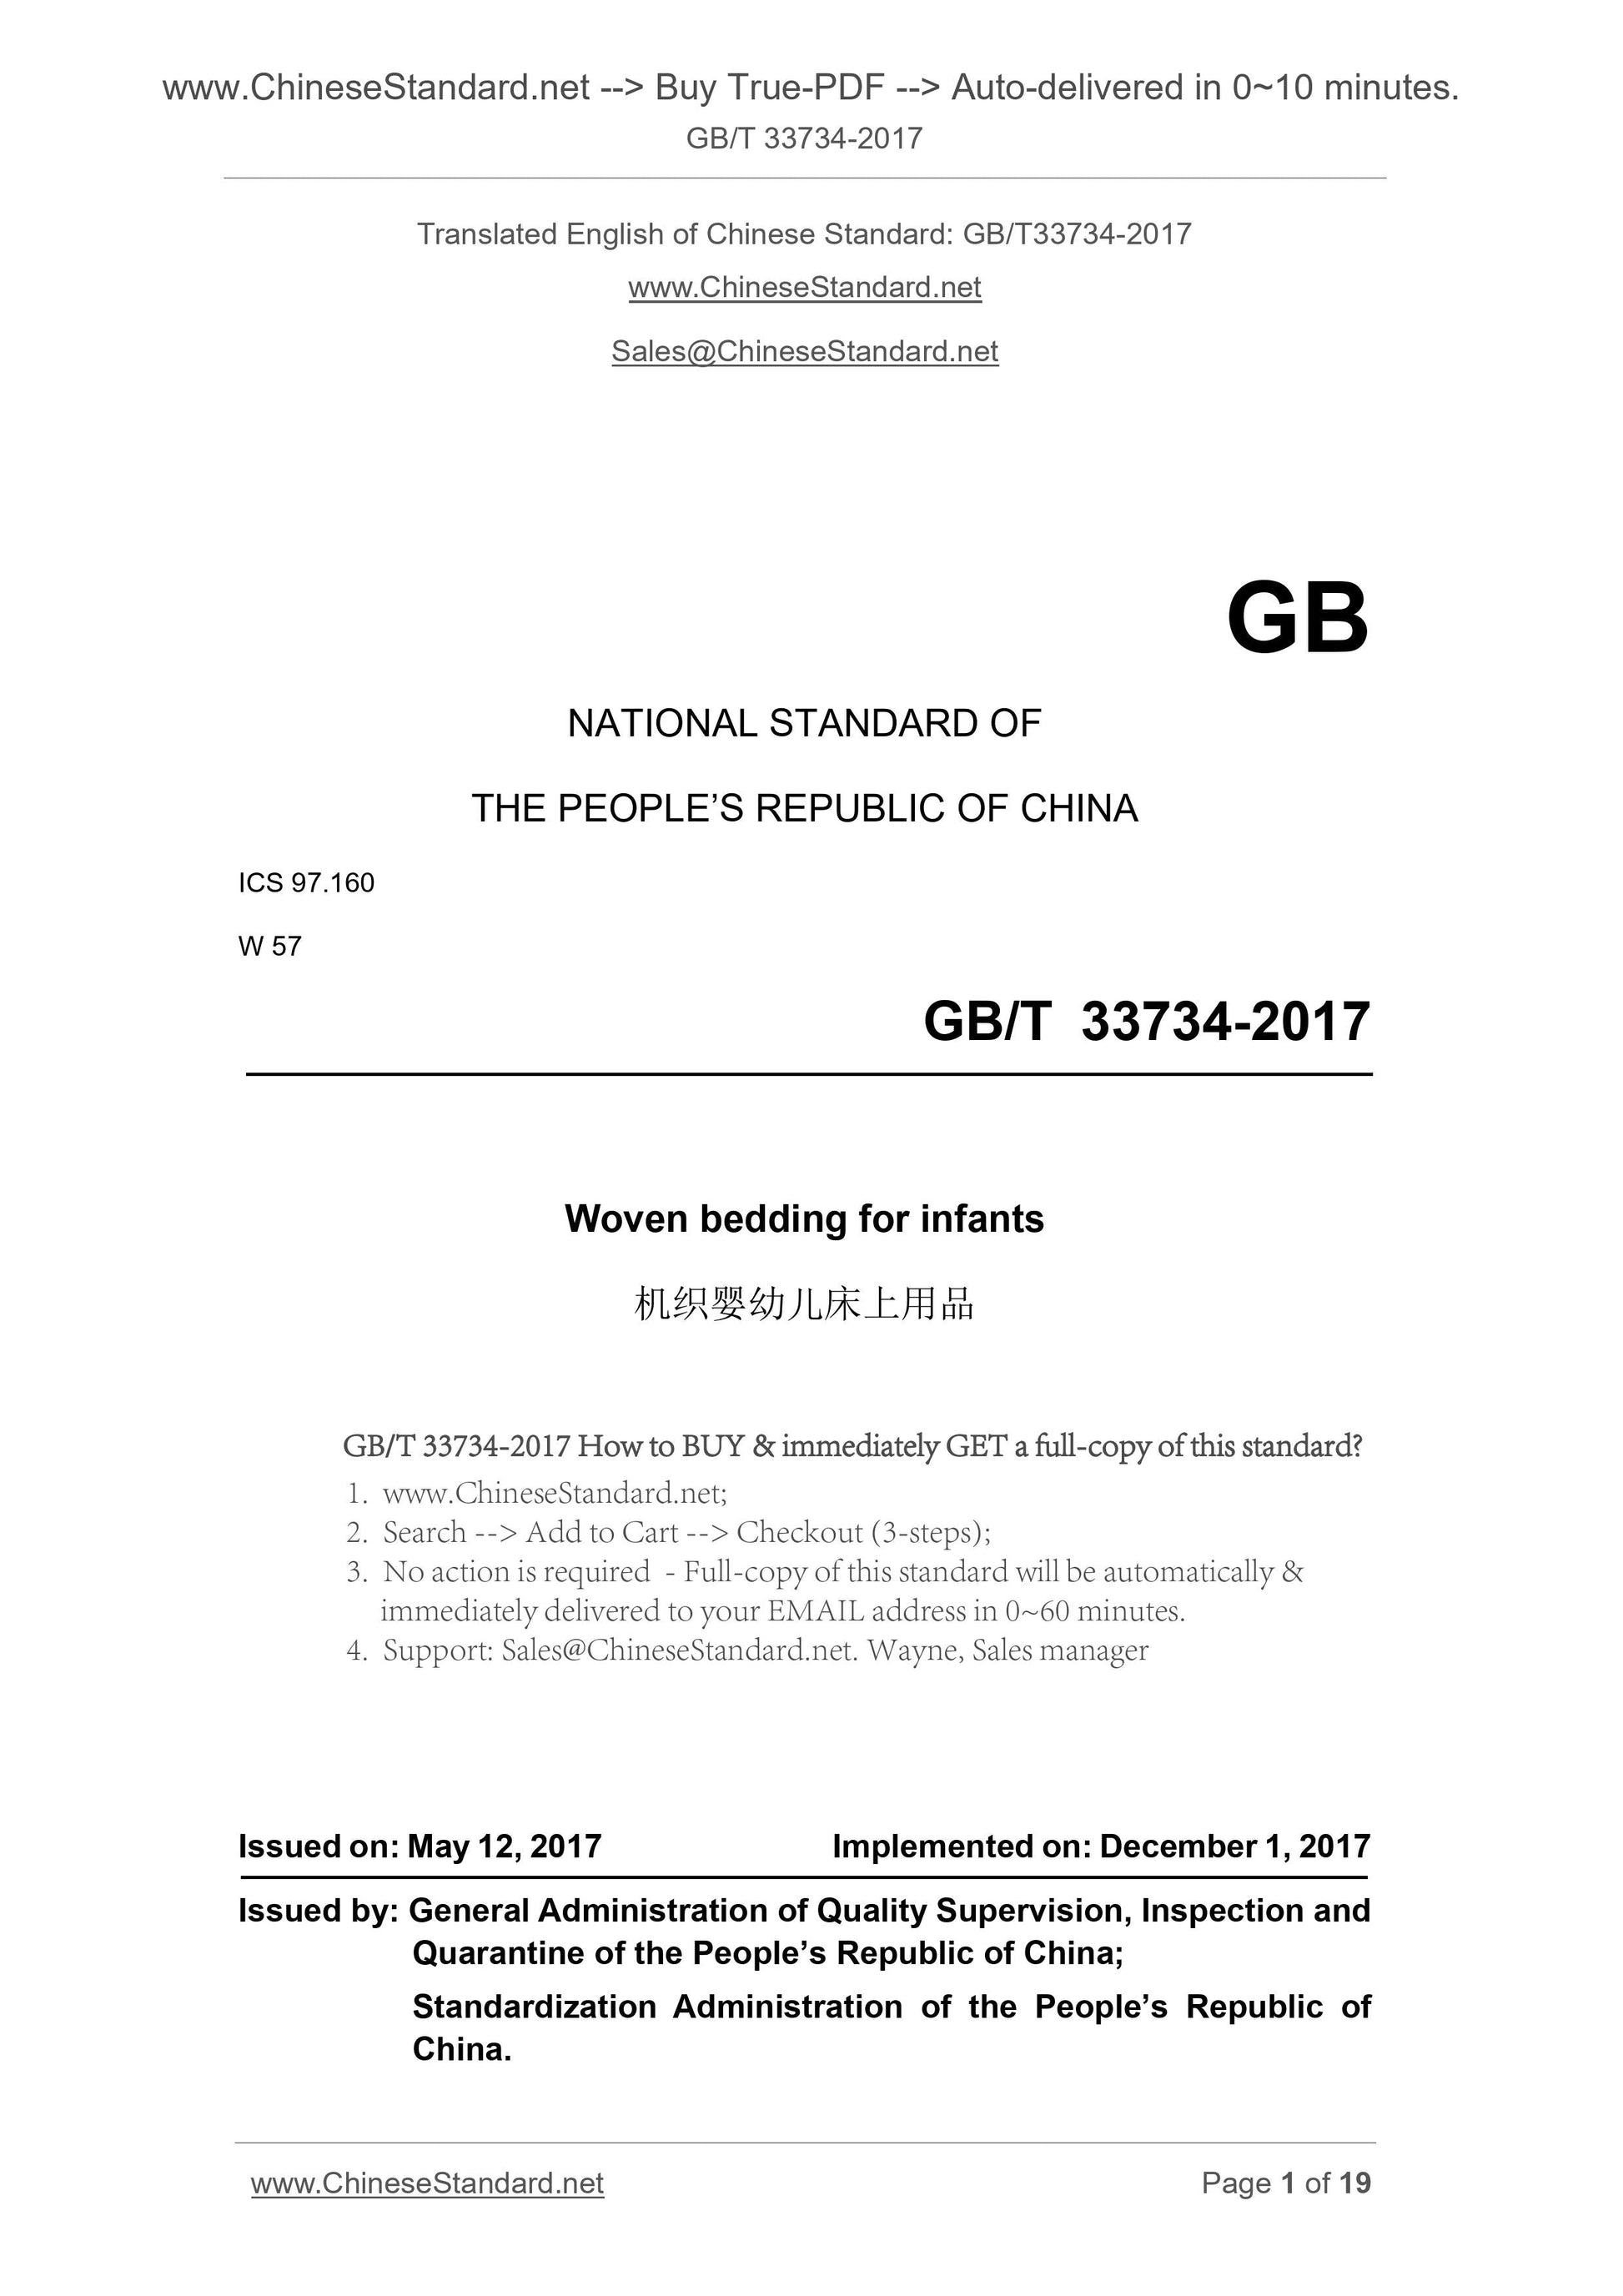 GB/T 33734-2017 Page 1